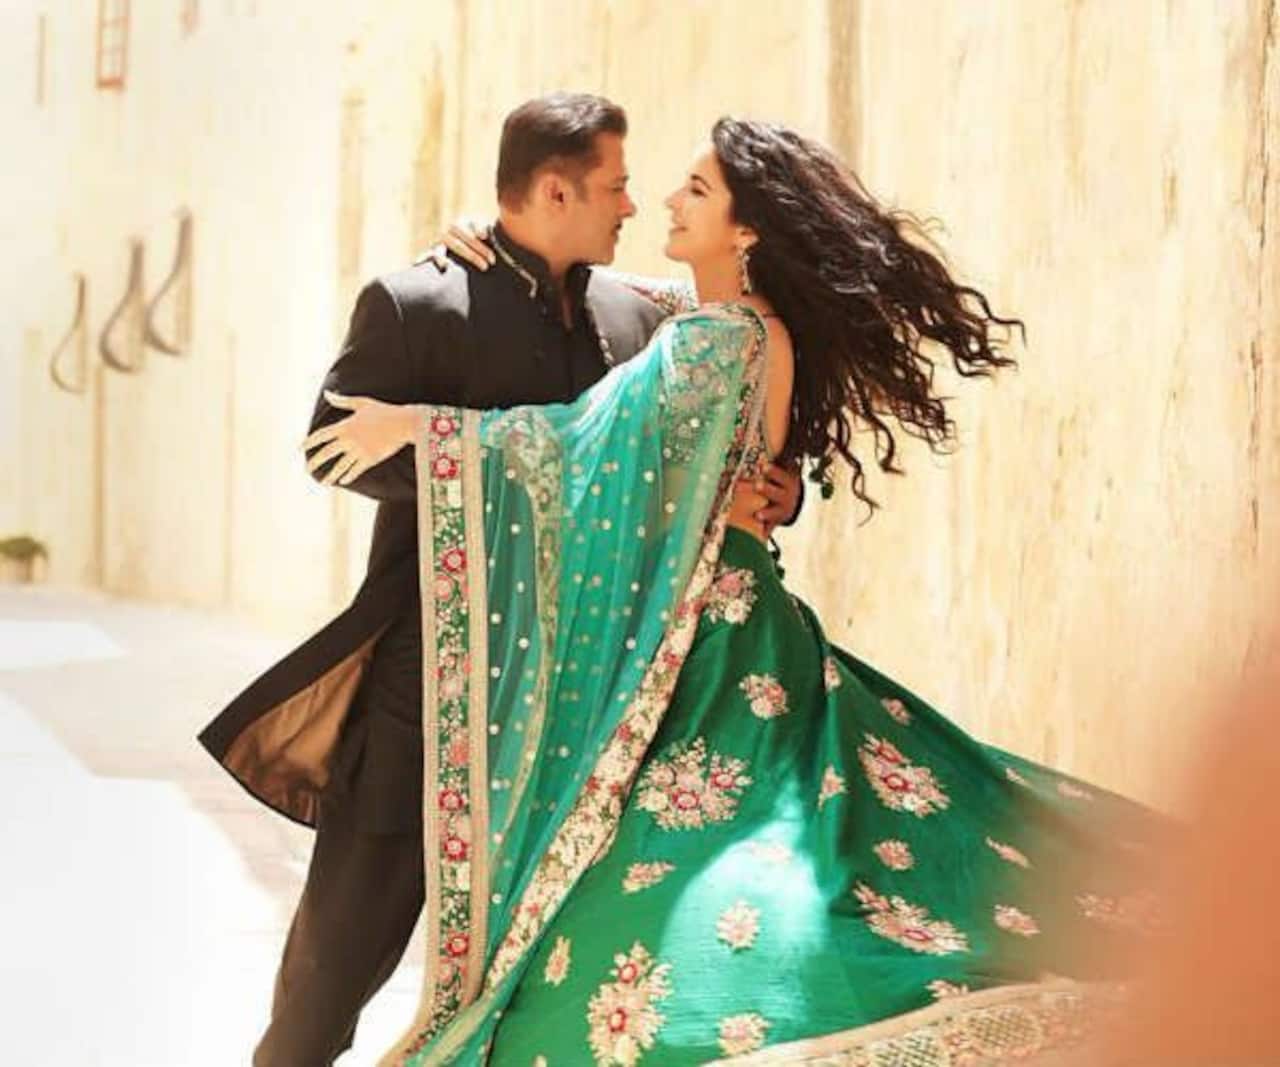 Whoa! The Rs 10 crore set will be destroyed in the climax of Salman Khan-Katrina Kaif's Bharat